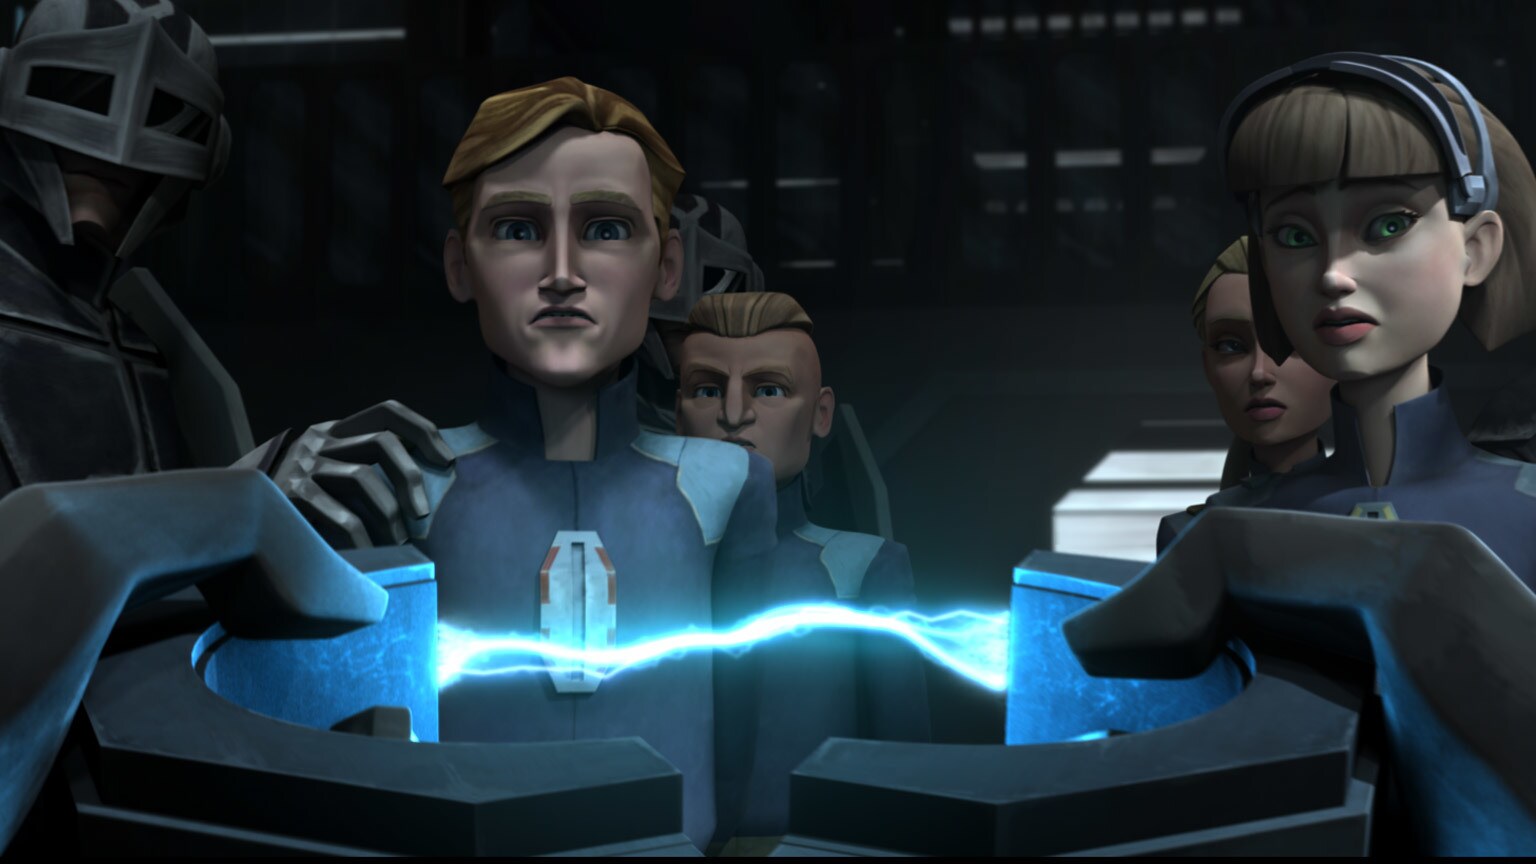 The Clone Wars Rewatch: Rebels in "The Academy"